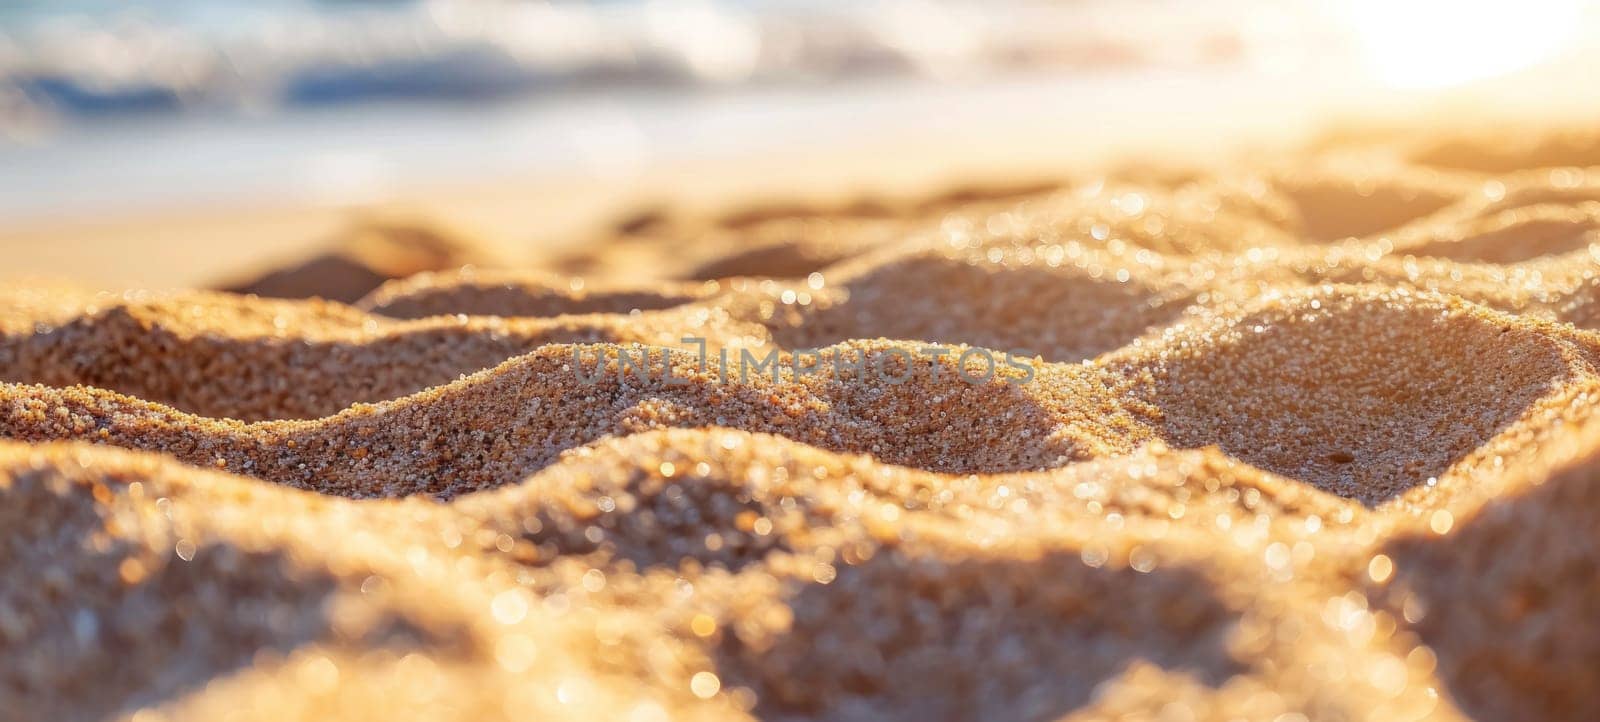 The warm glow of sunrise illuminating the textures of a golden sandy beach.